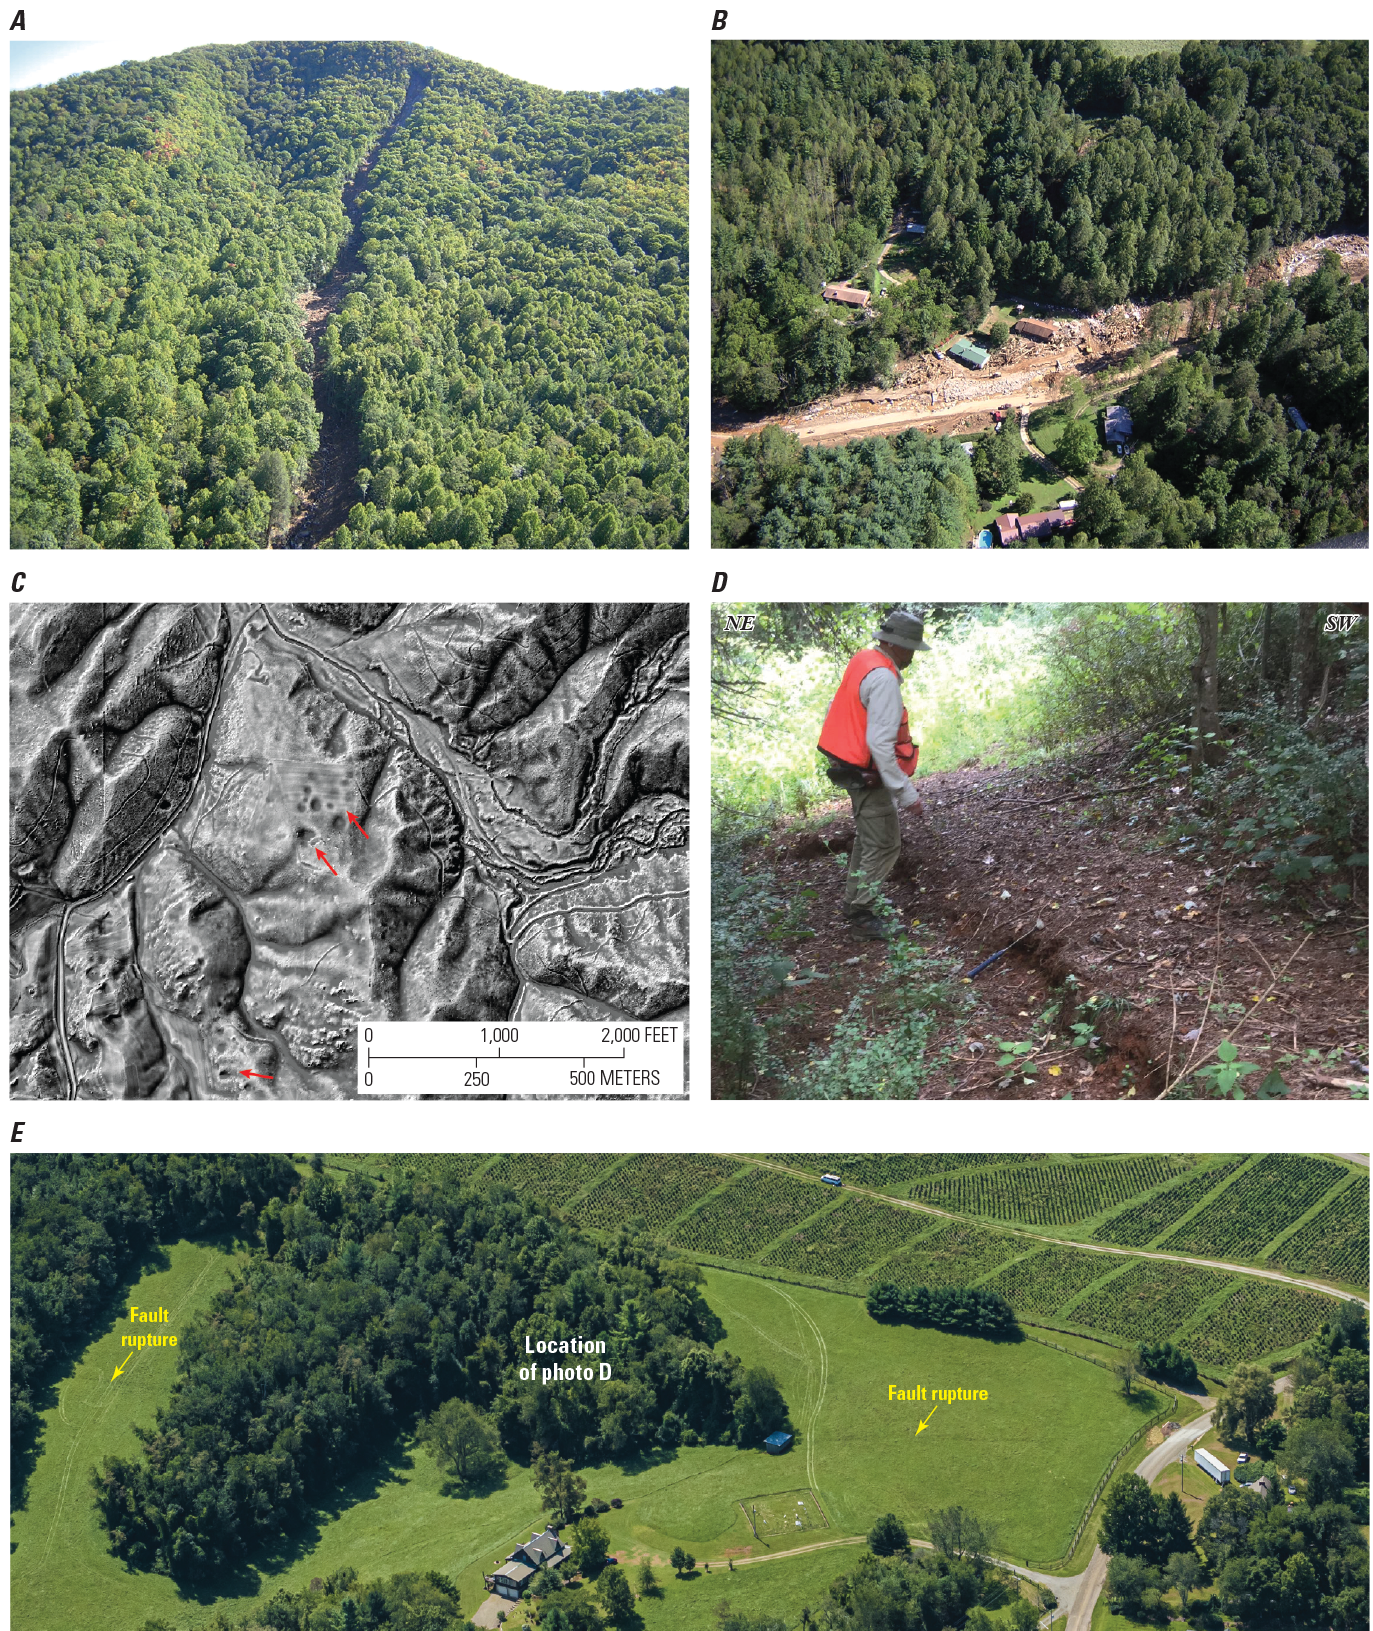 Five photographs showing hilly landscape, houses among trees, lidar topography, person
                        standing in fault line surrounded by trees, and aerial view of fault line with trees
                        and one house